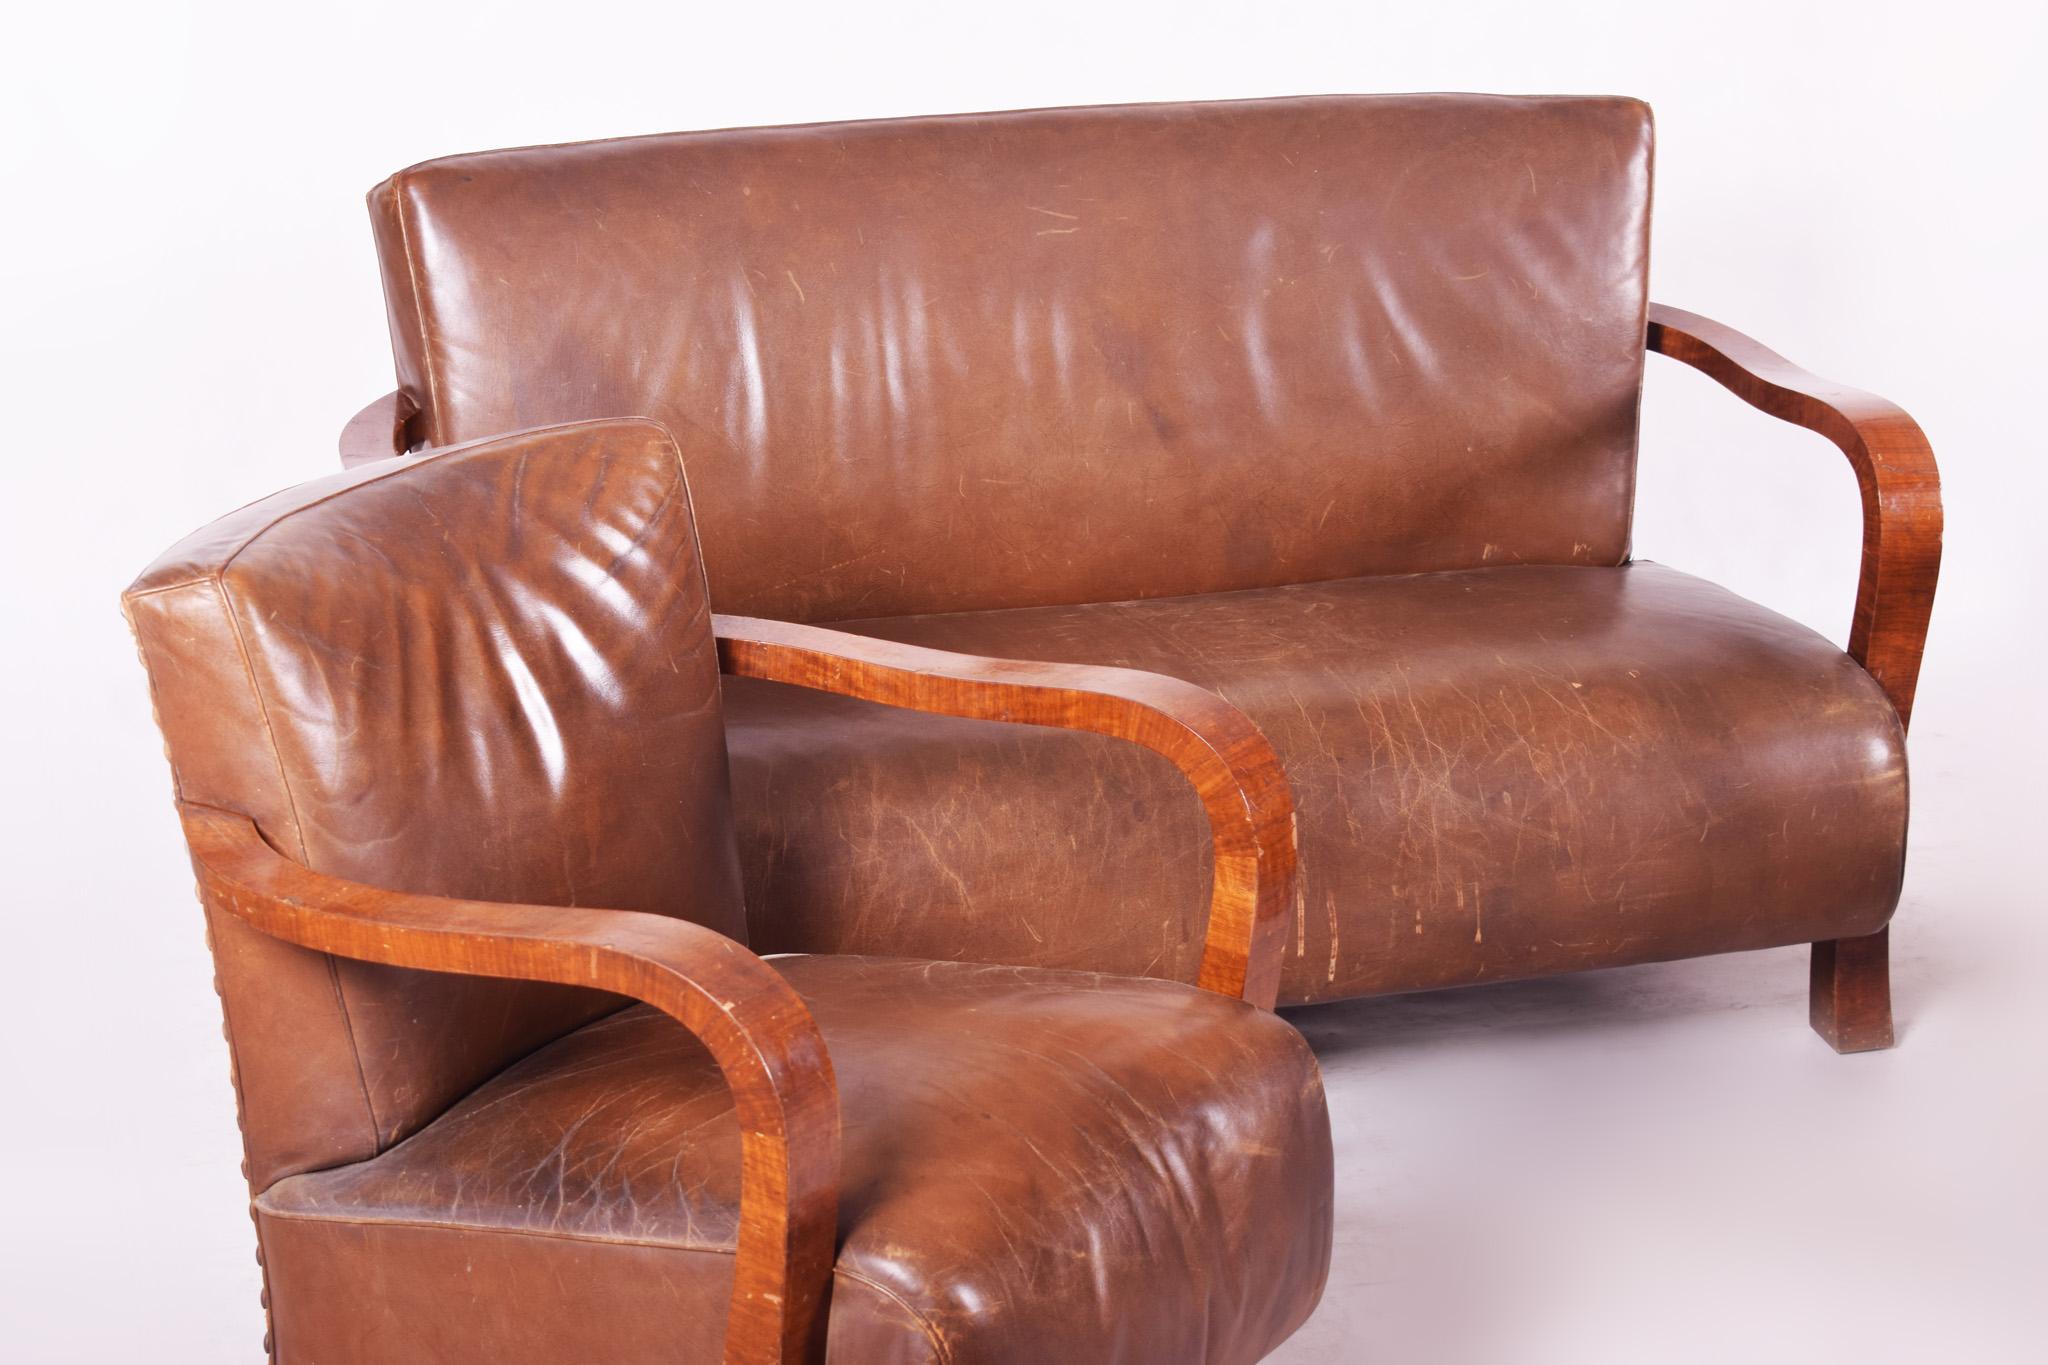 Czech Brown Walnut Art Deco Three-Piece Suite, Preserved Condition and Leather, 1930s For Sale